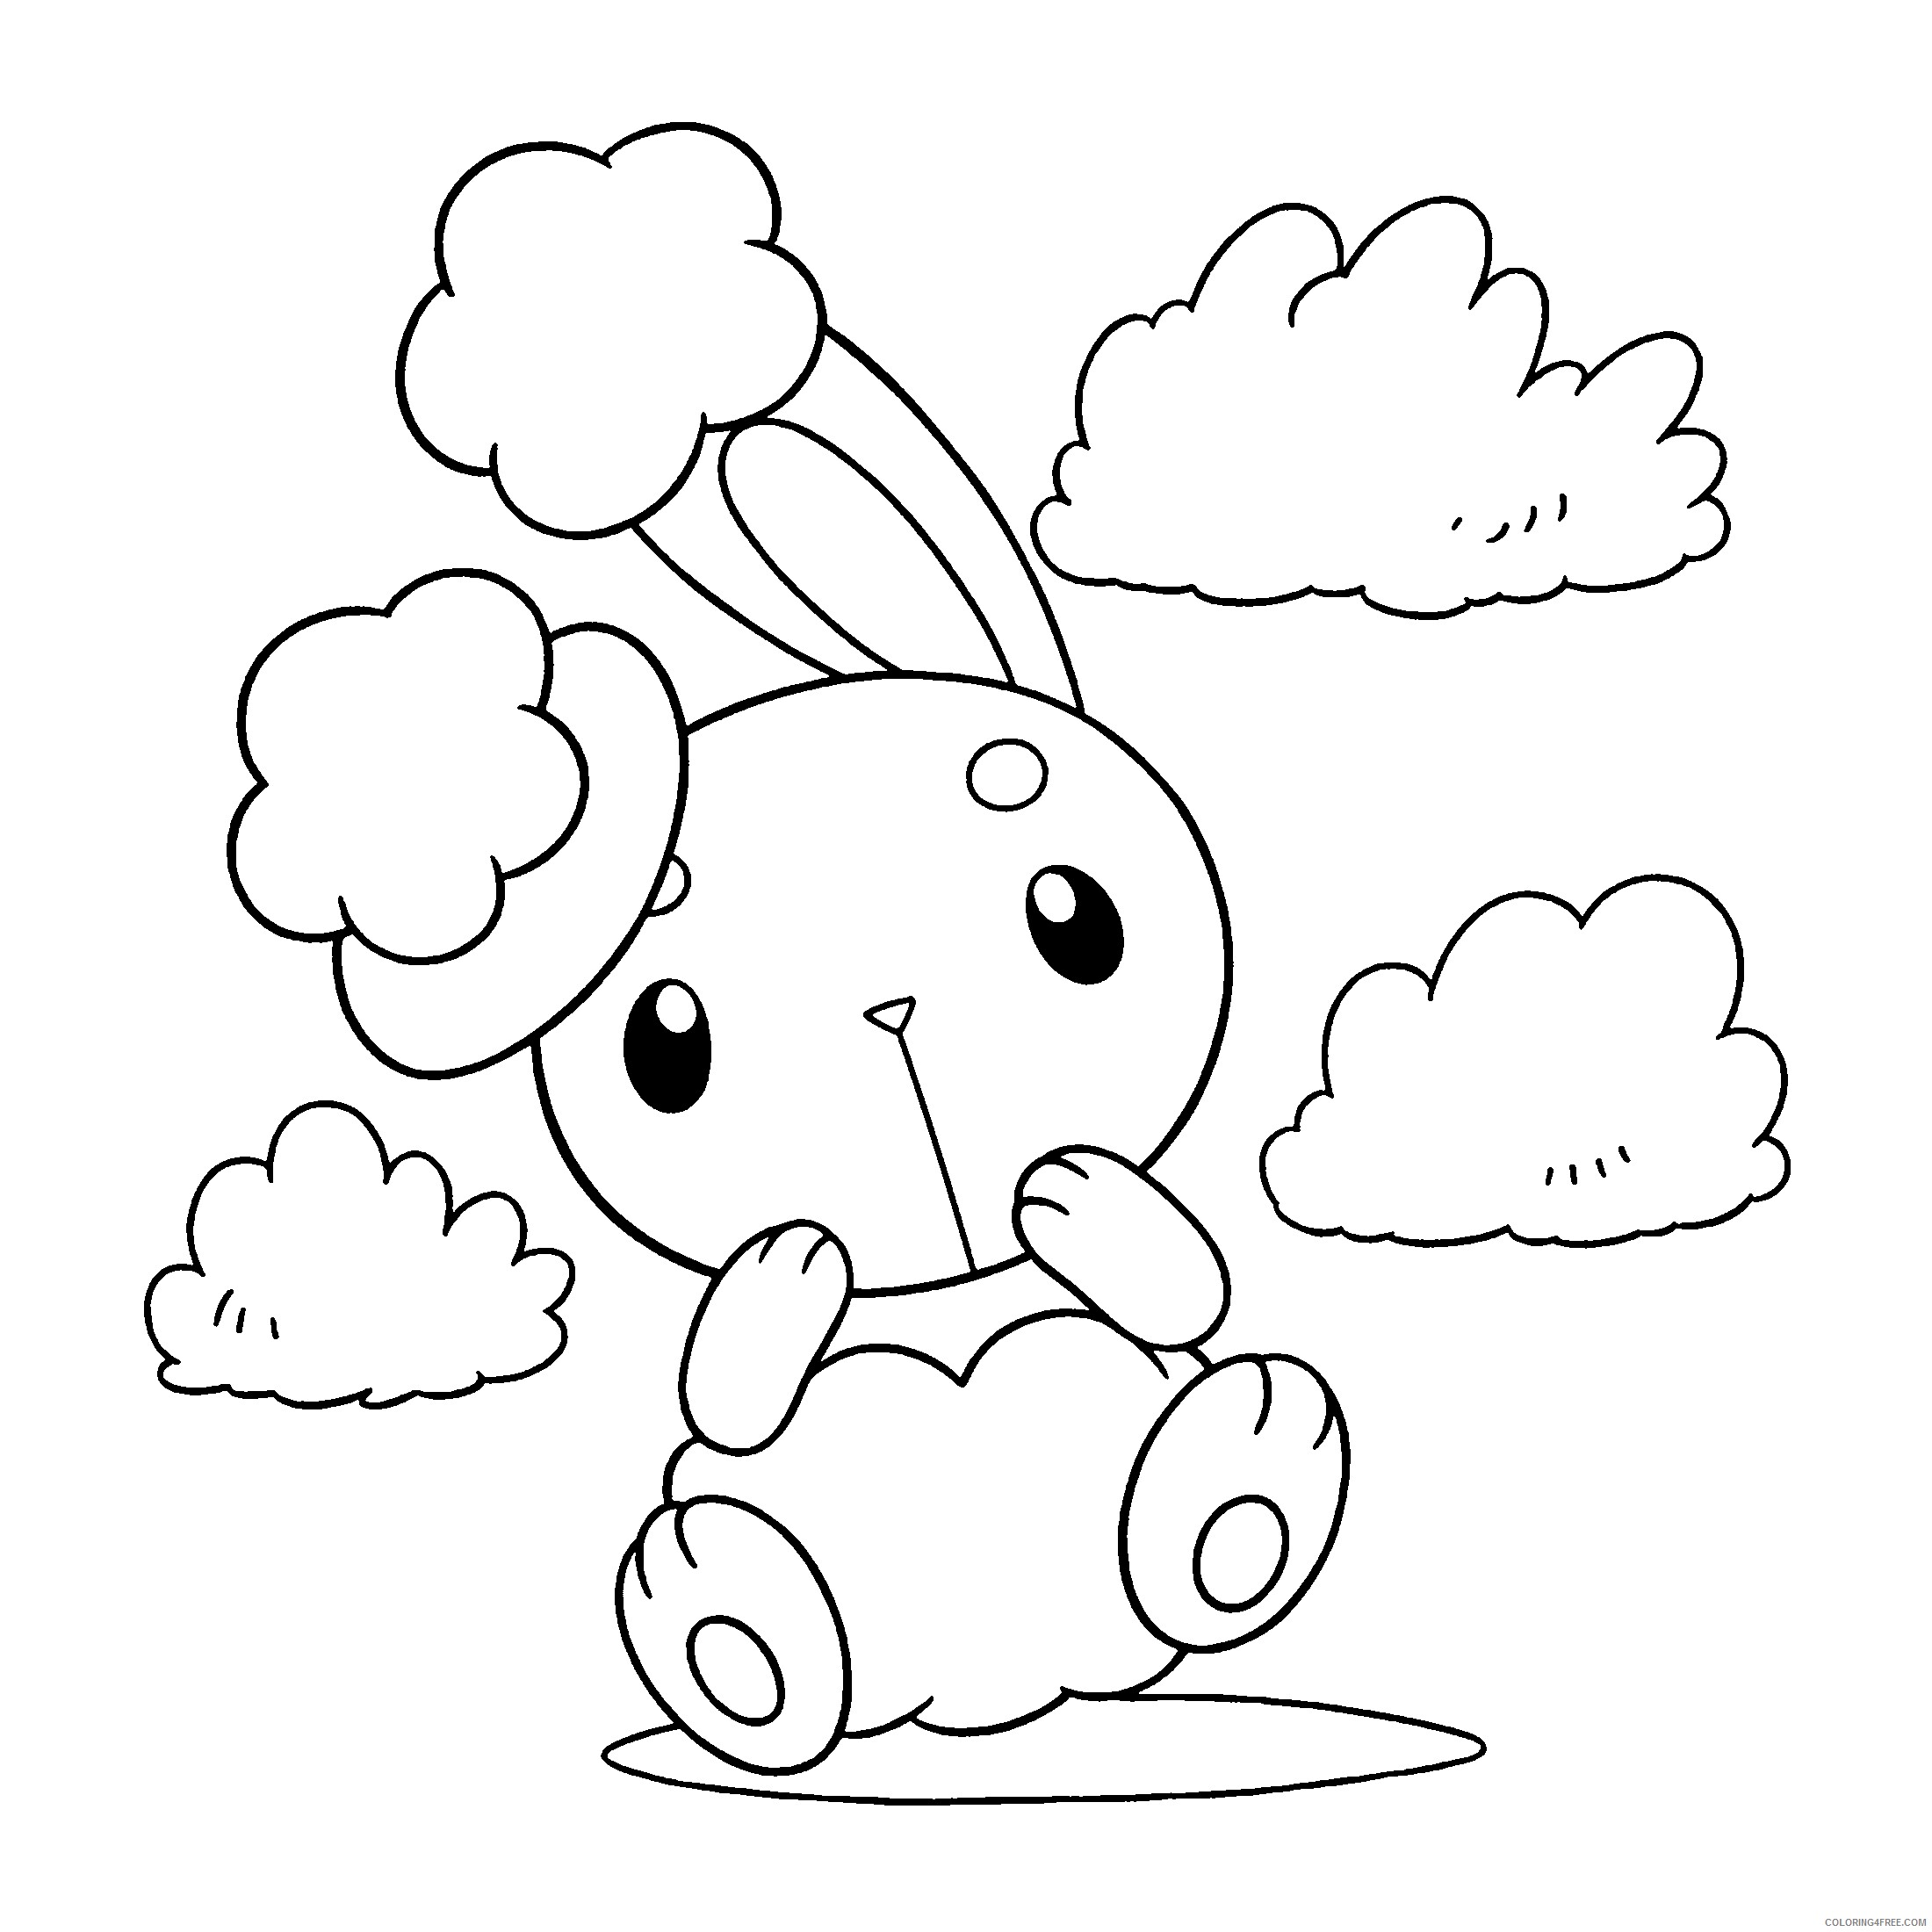 Pokemon Diamond and Pearl Coloring Pages Games Printable 2021 0898 Coloring4free